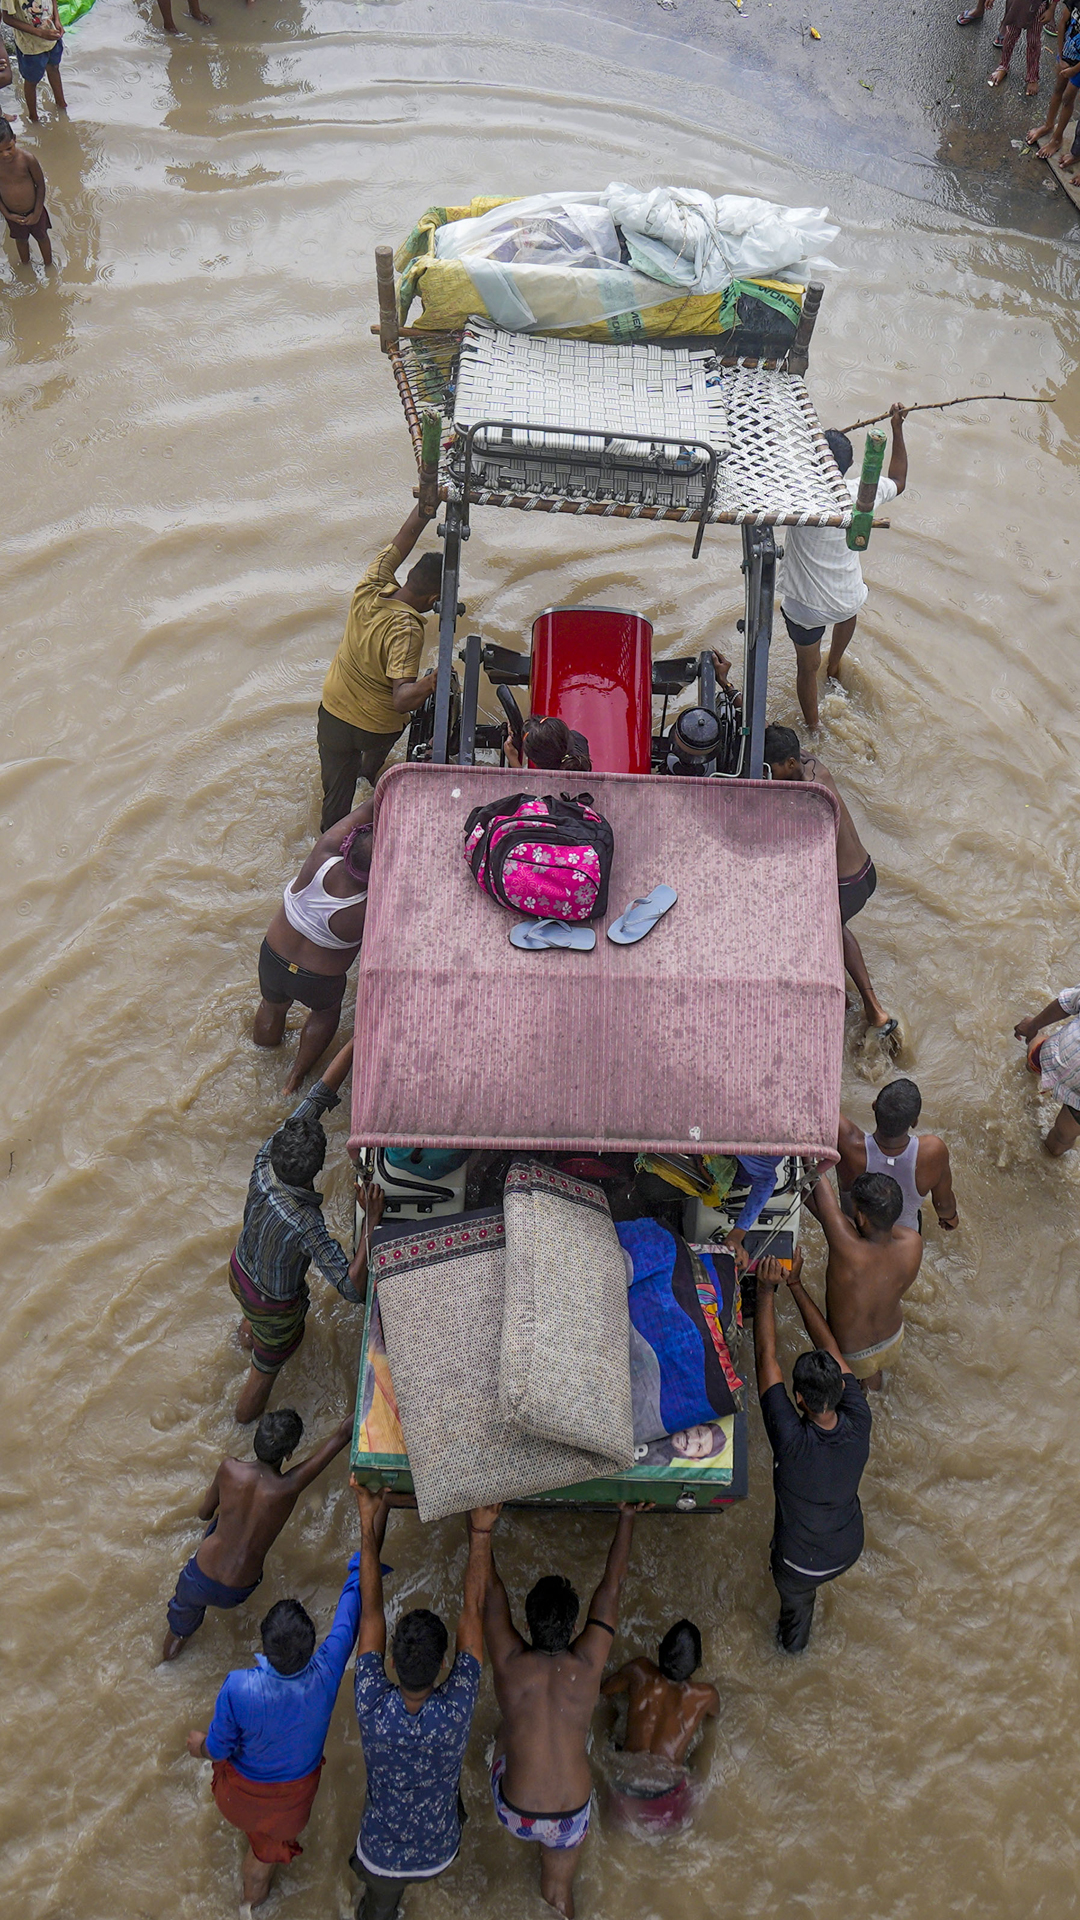 Flood affected people at Nizamuddin Bridge after being relocated to makeshift tents